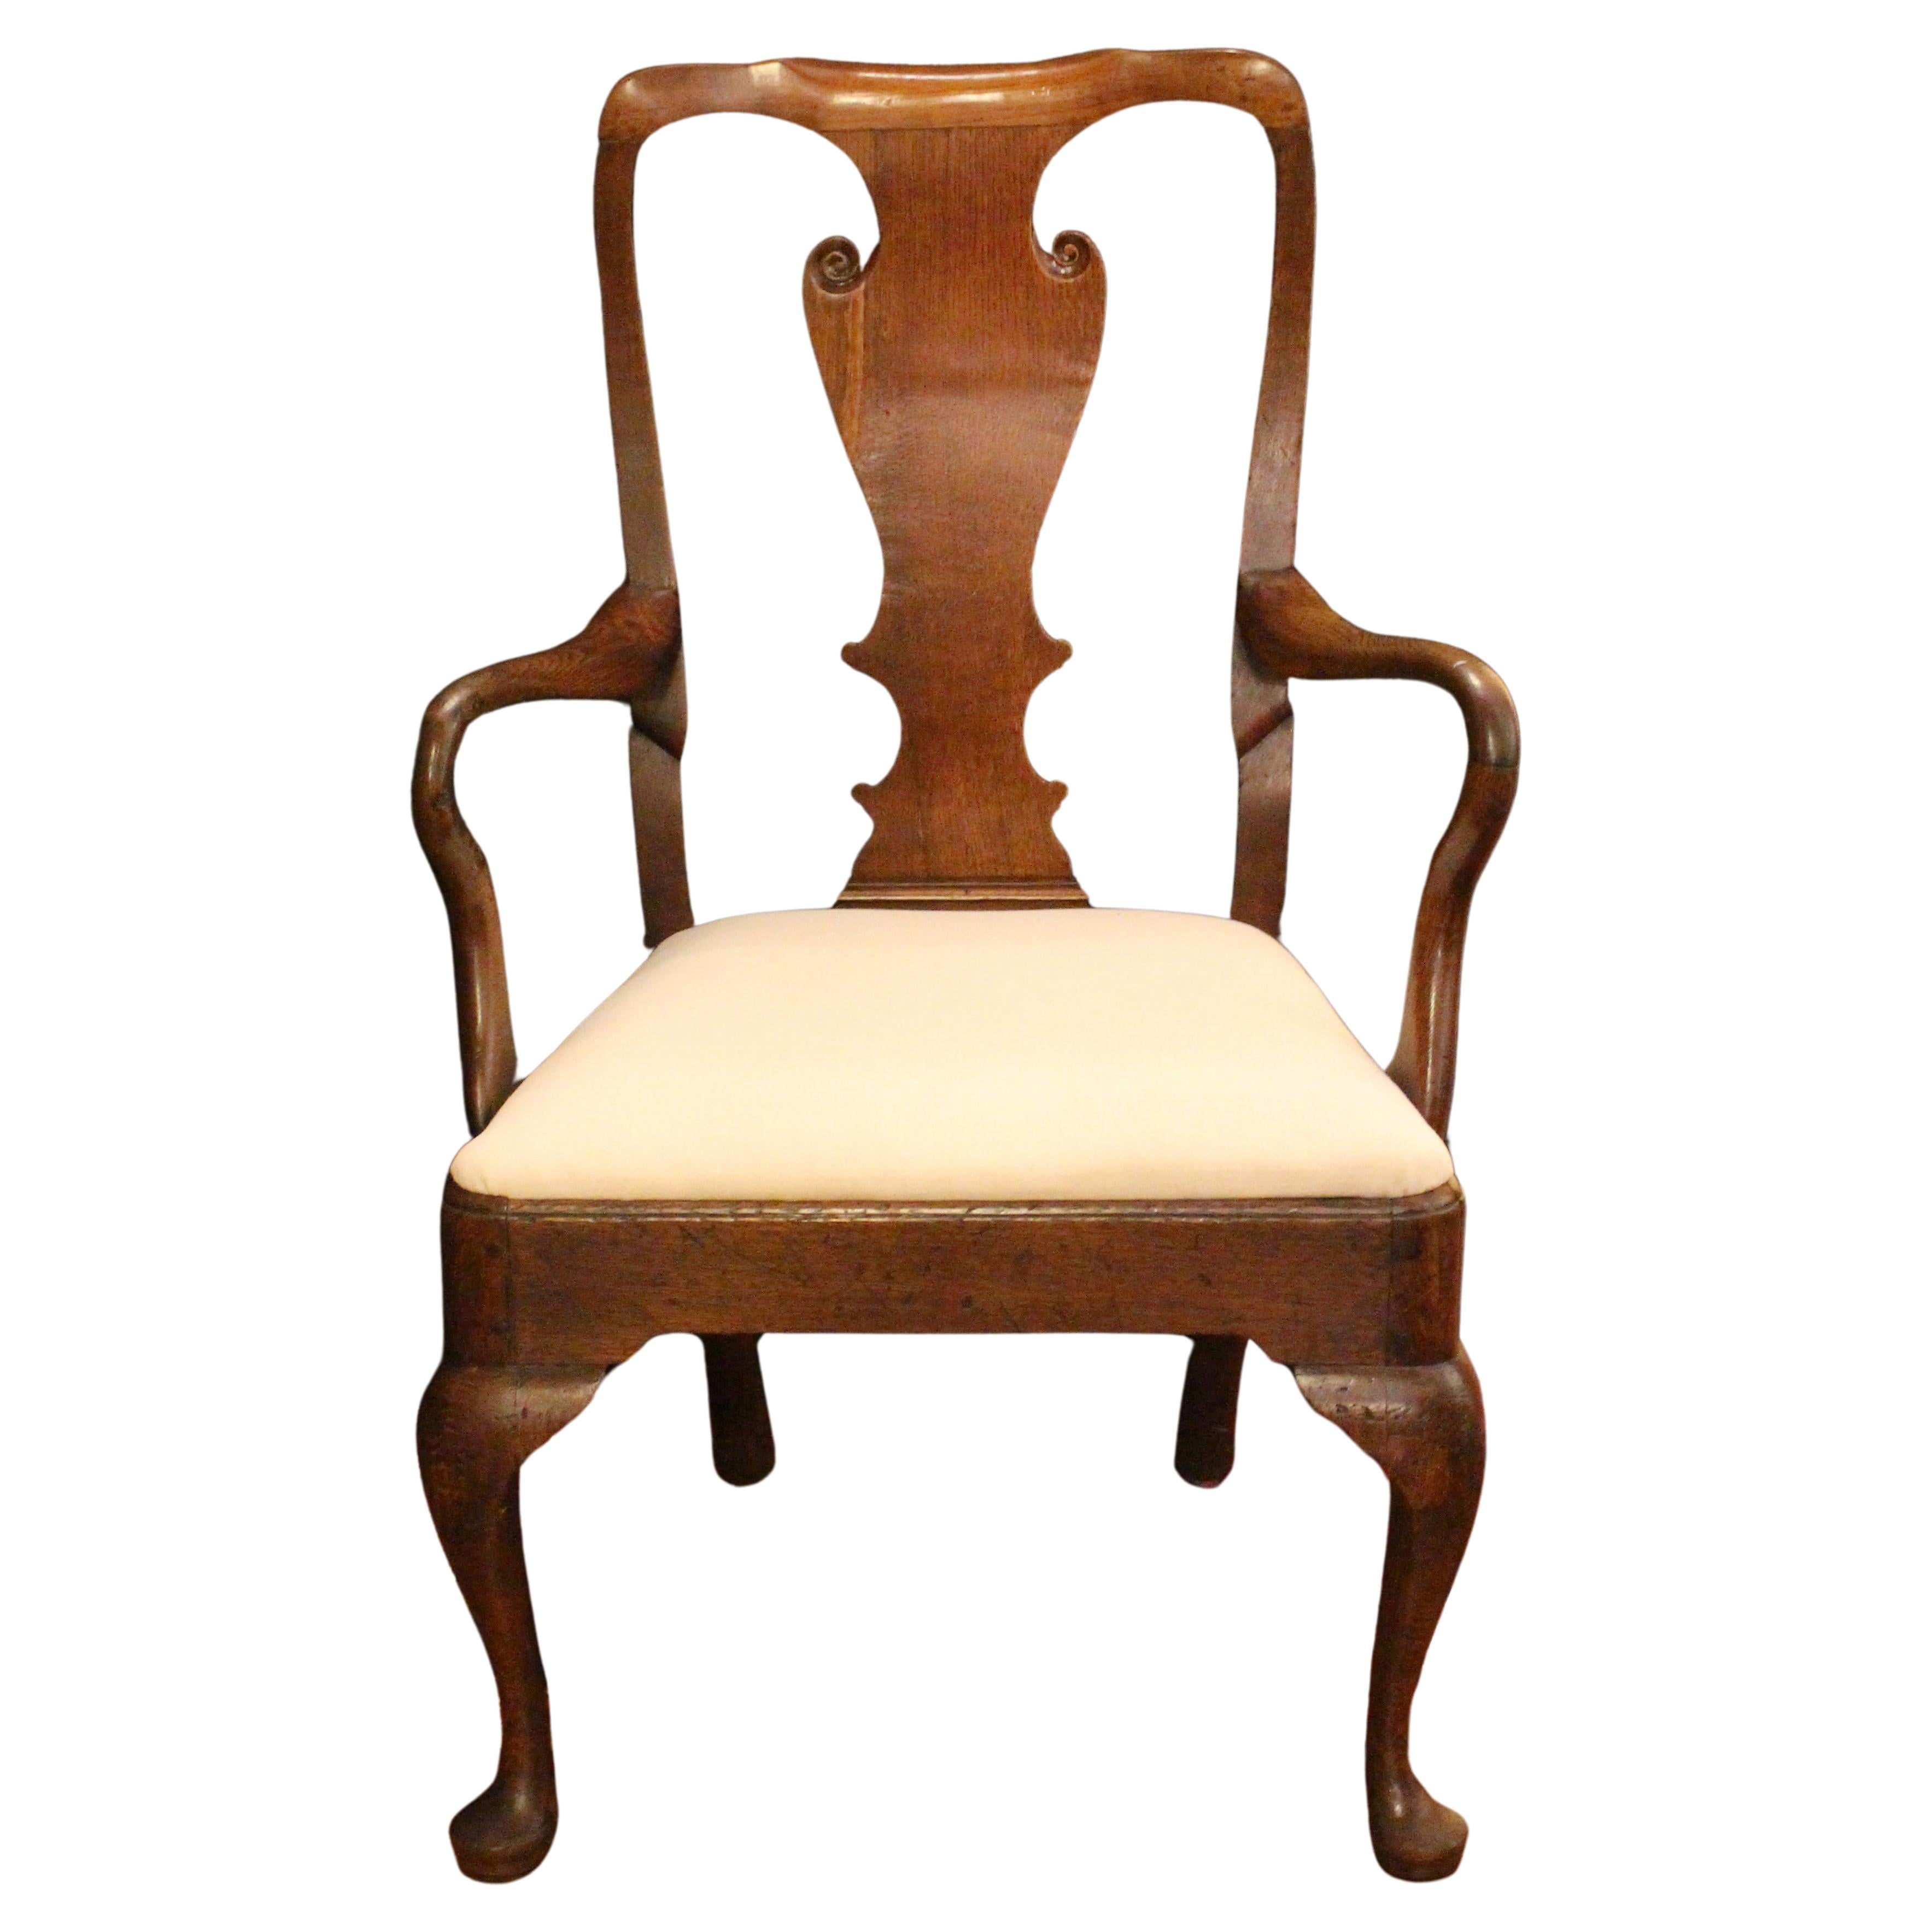 Early-Mid 18th Century Queen Anne Arm Chair For Sale